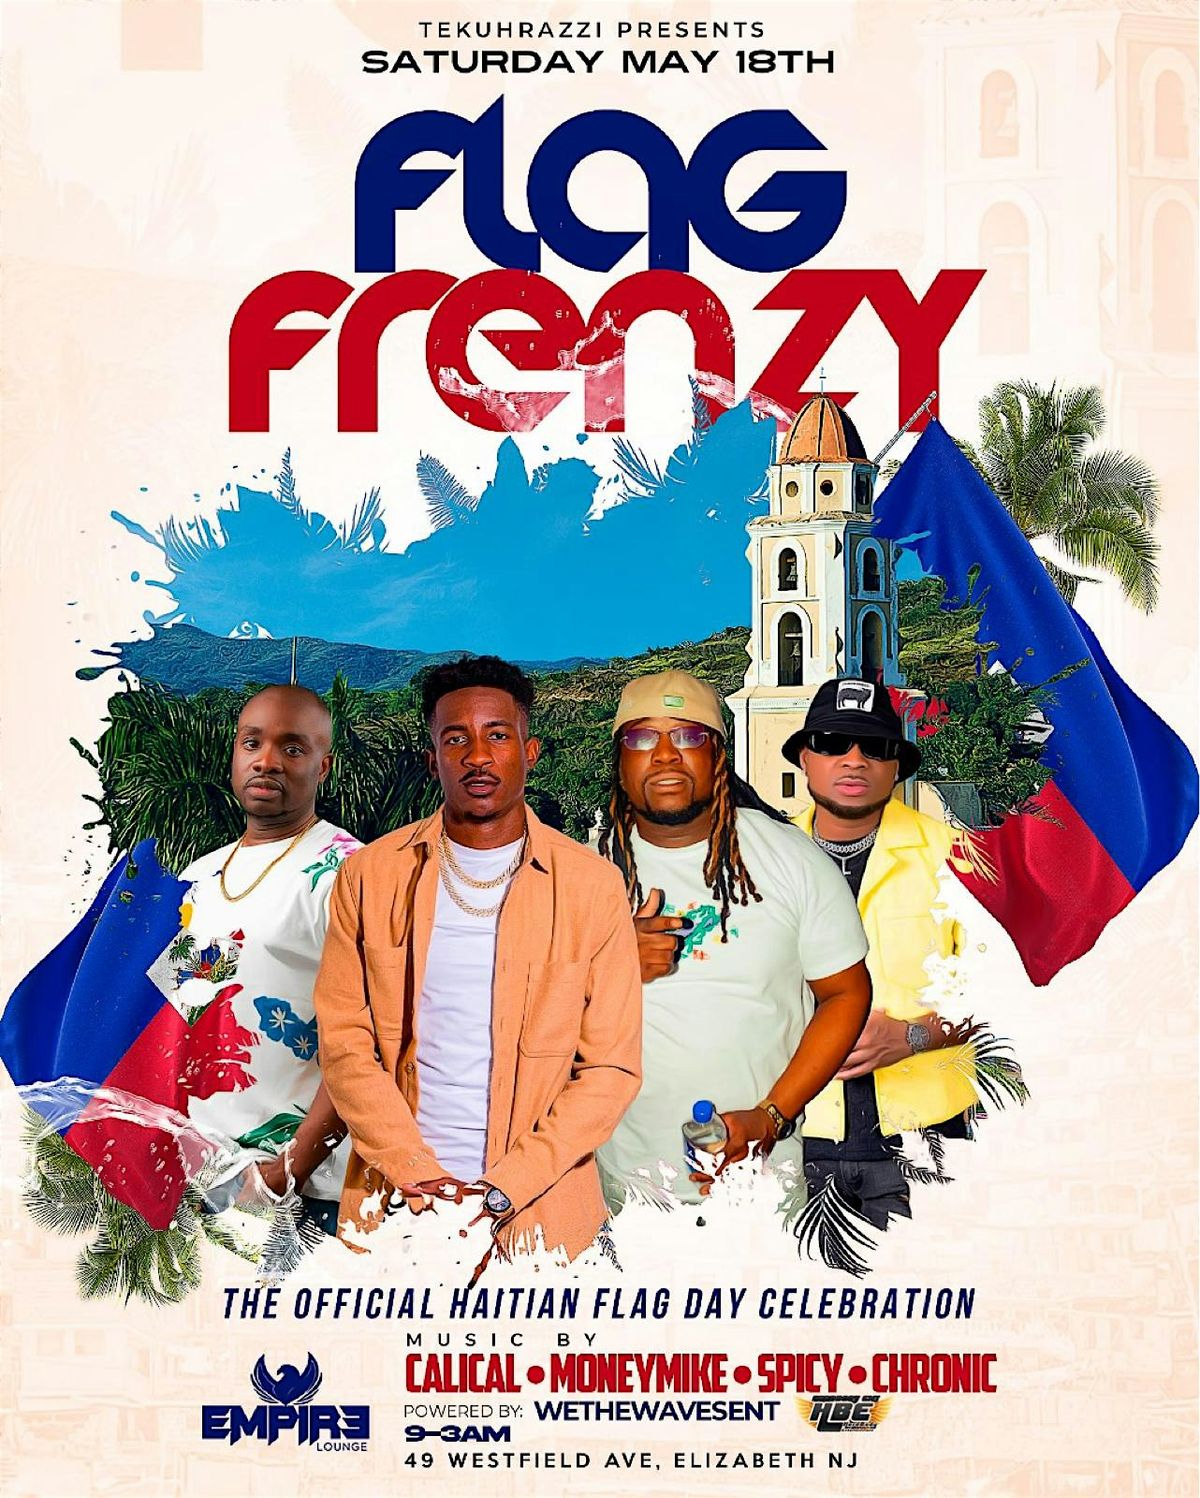 FLAG FRENZY: THE OFFICIAL HAITIAN FLAG DAY FETE